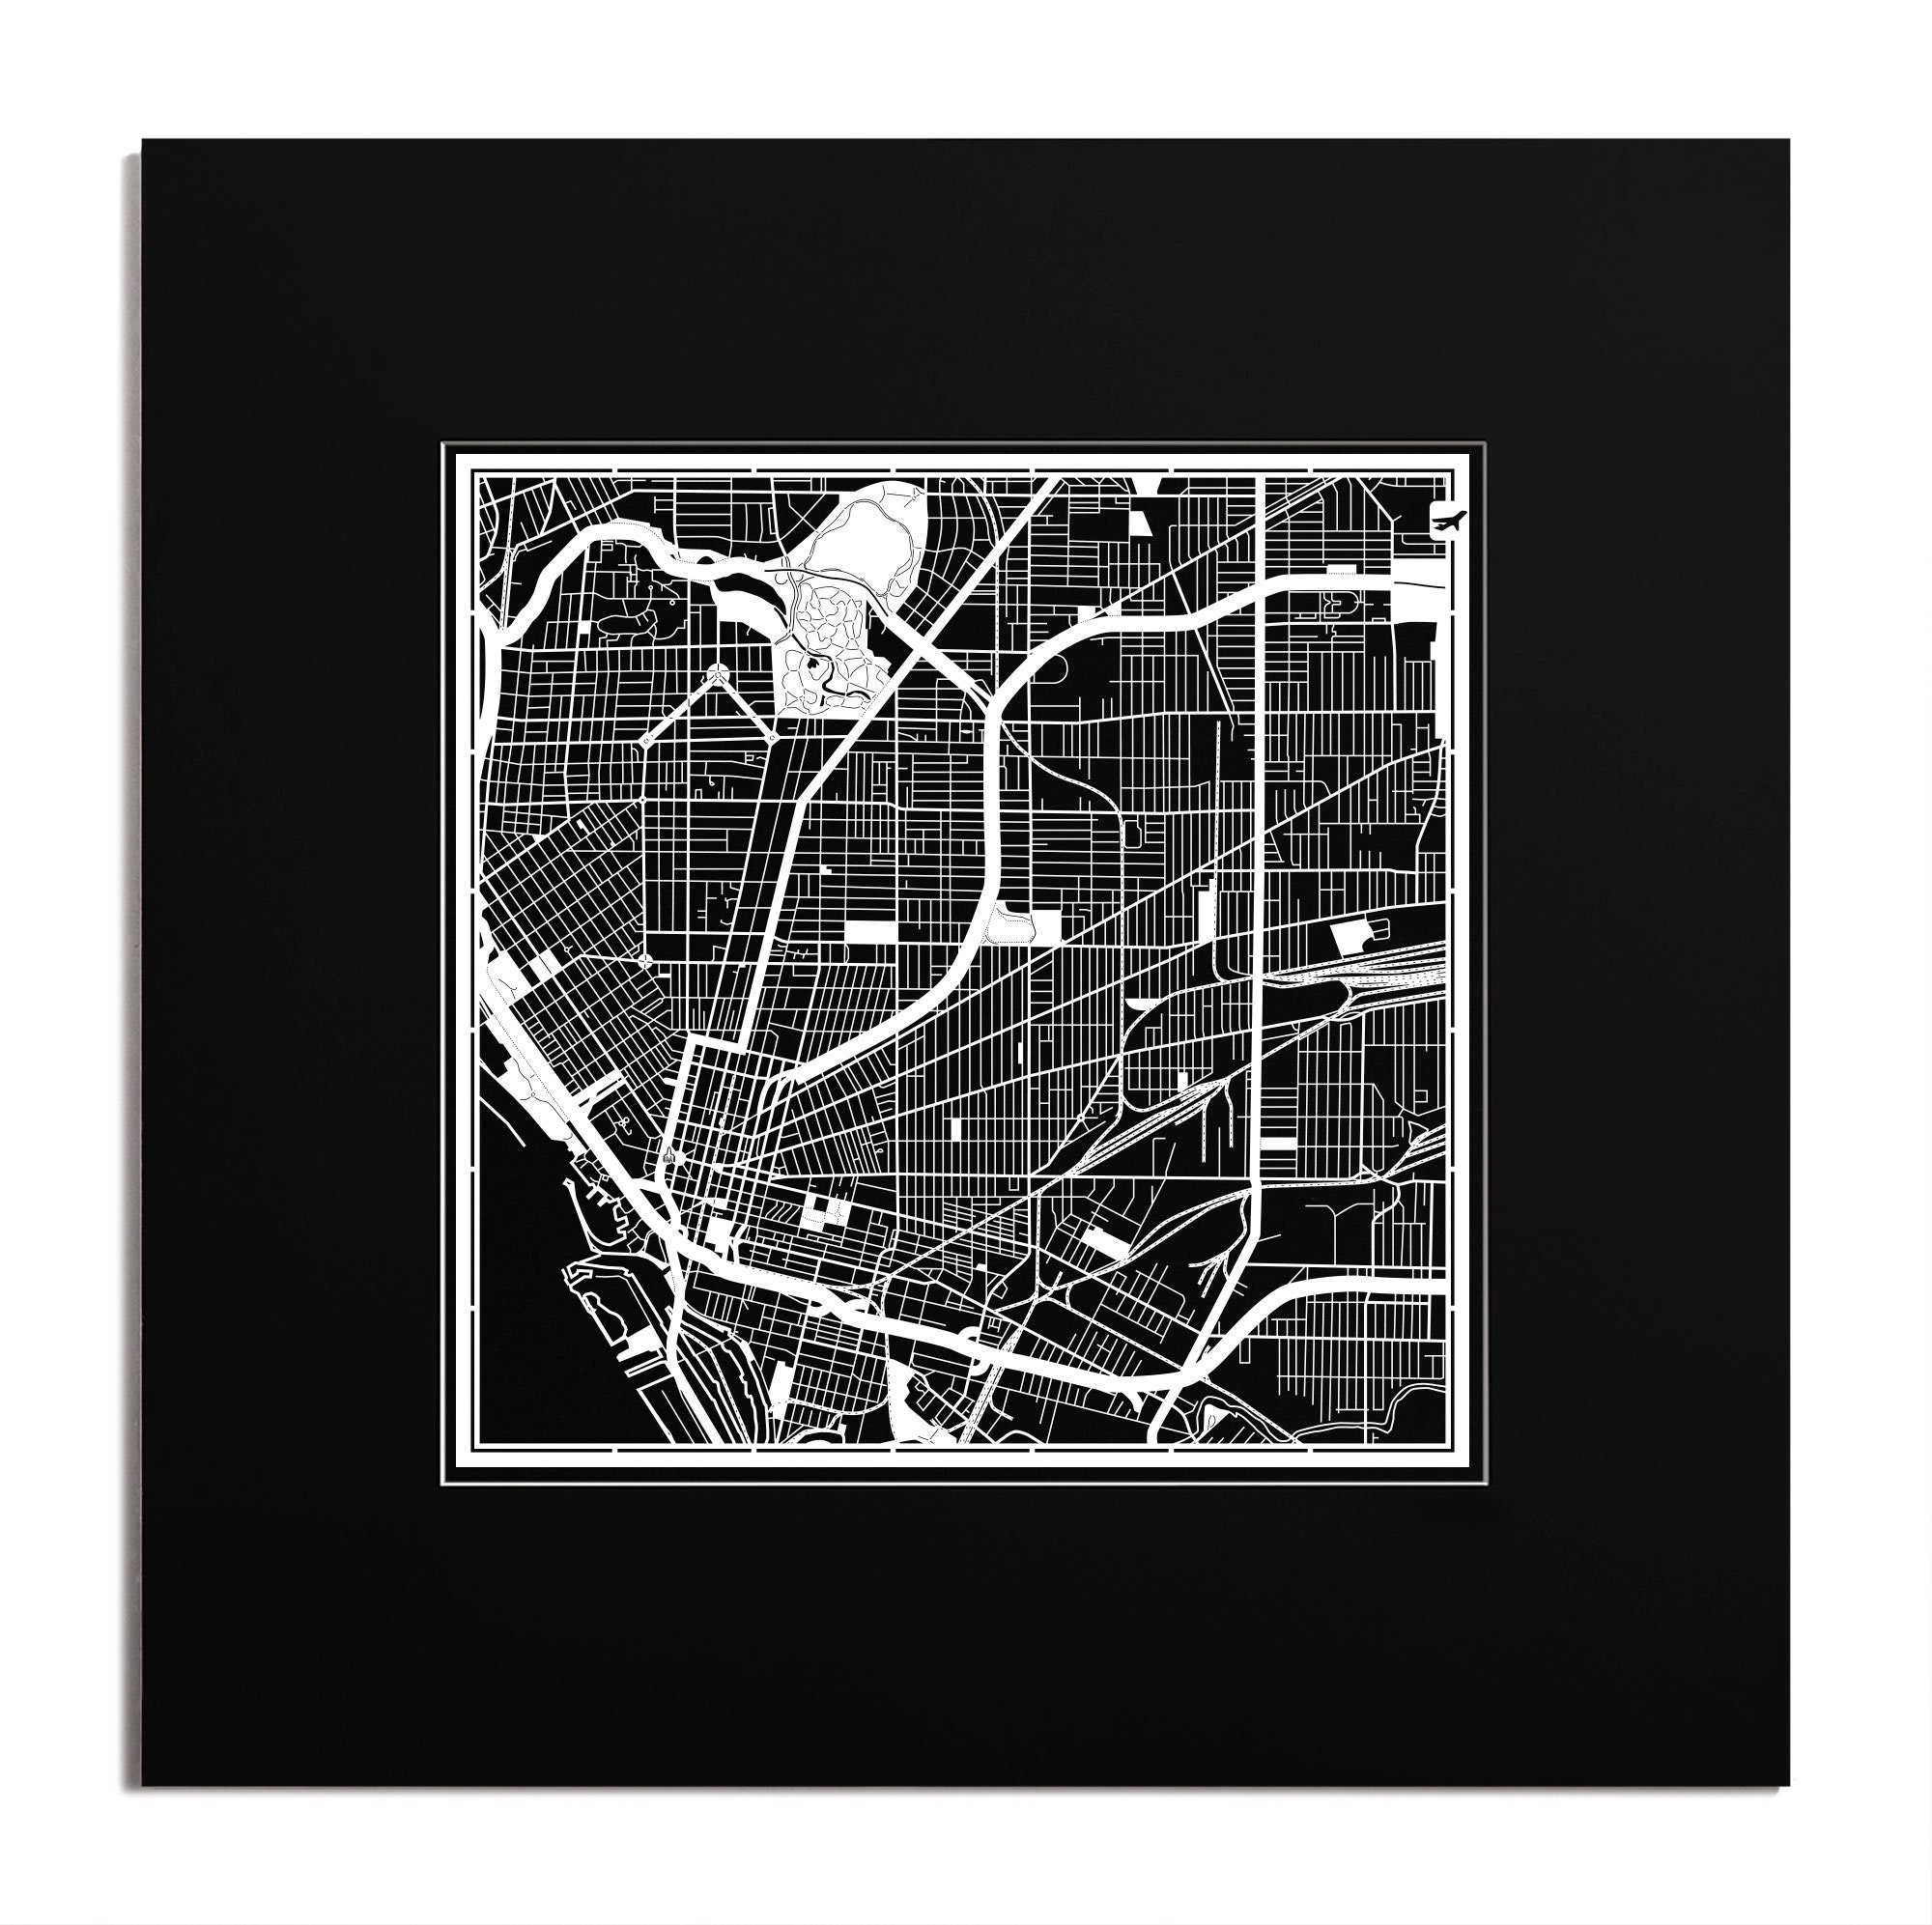 Buffalo, Long Island, Paper Cut Map, Matted 2020 In. Color Alternative, Art Ideal Gifts